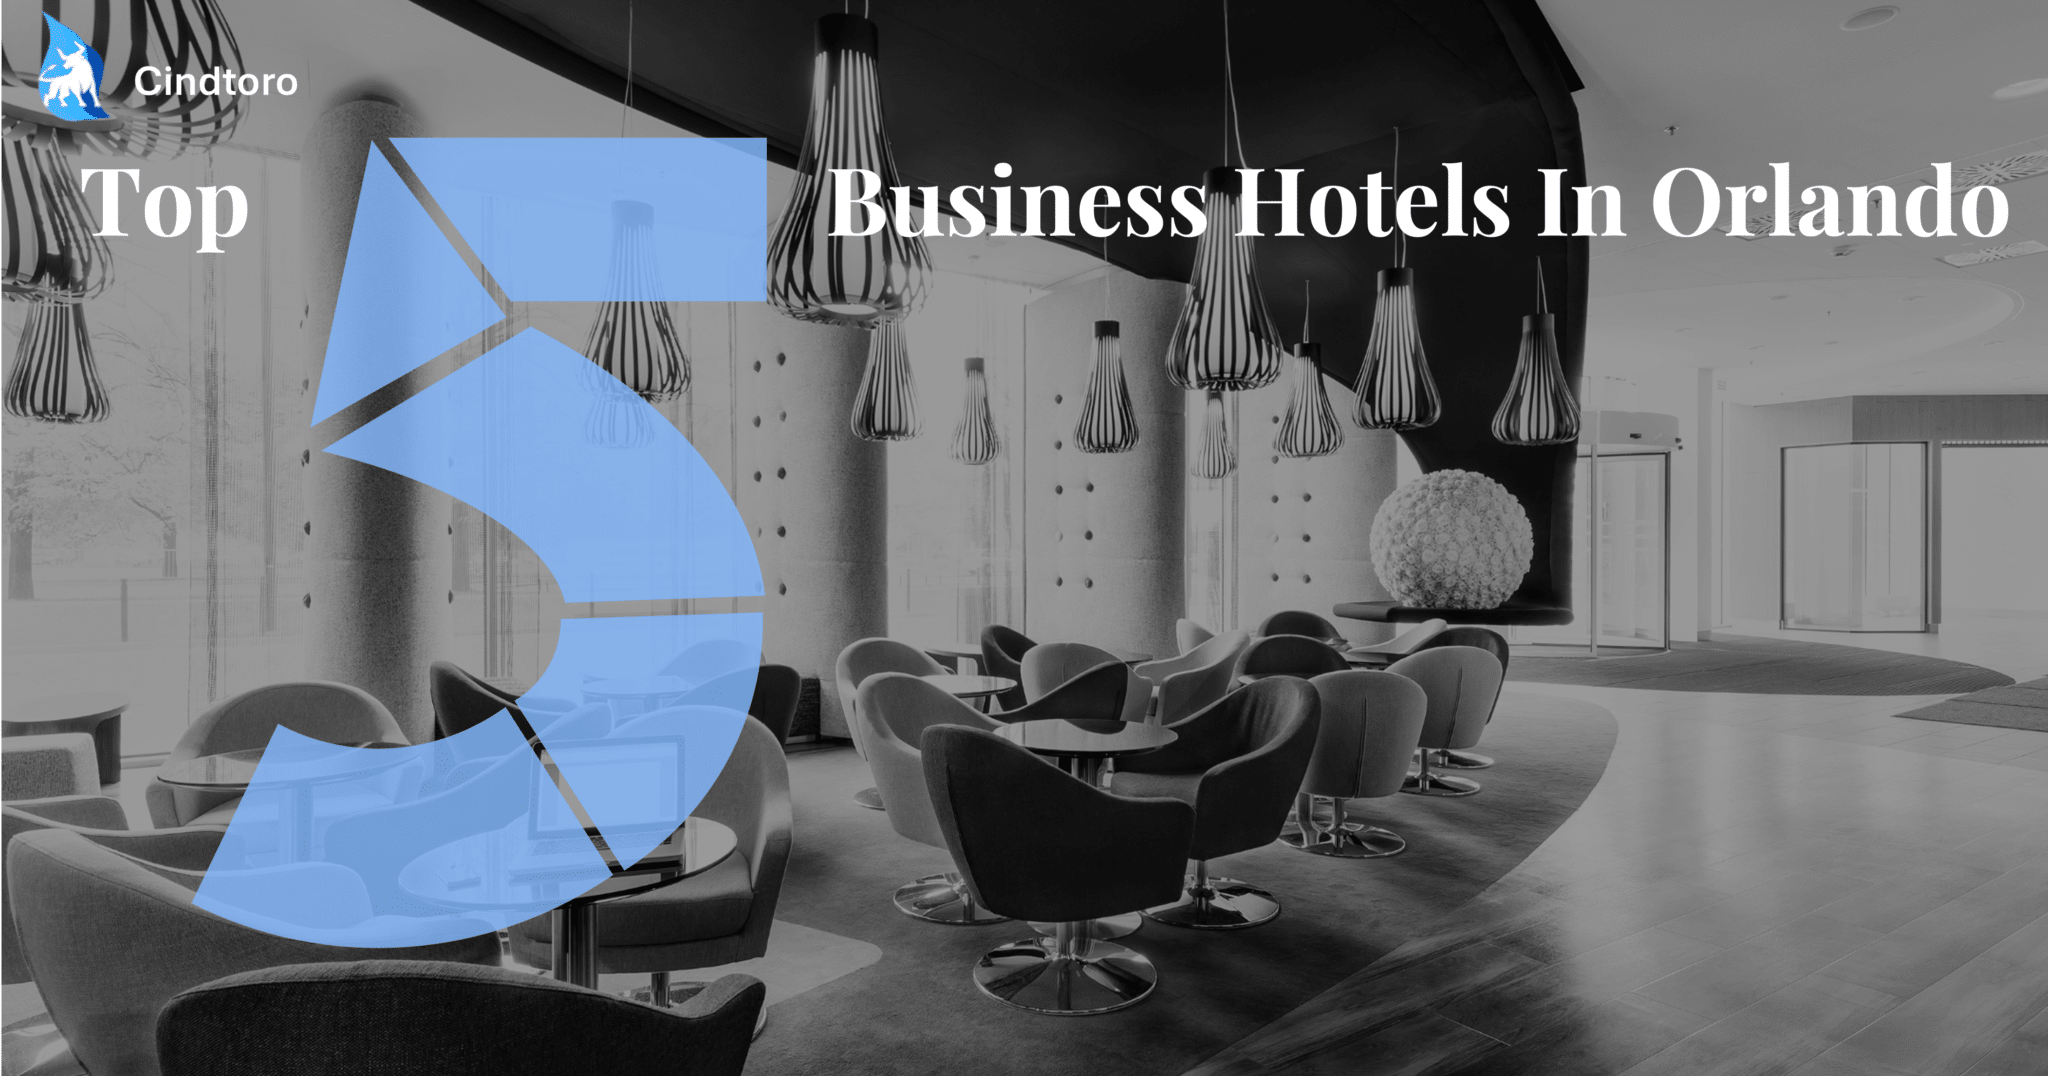 What are the top 5 Business Hotels in Orlando Florida?